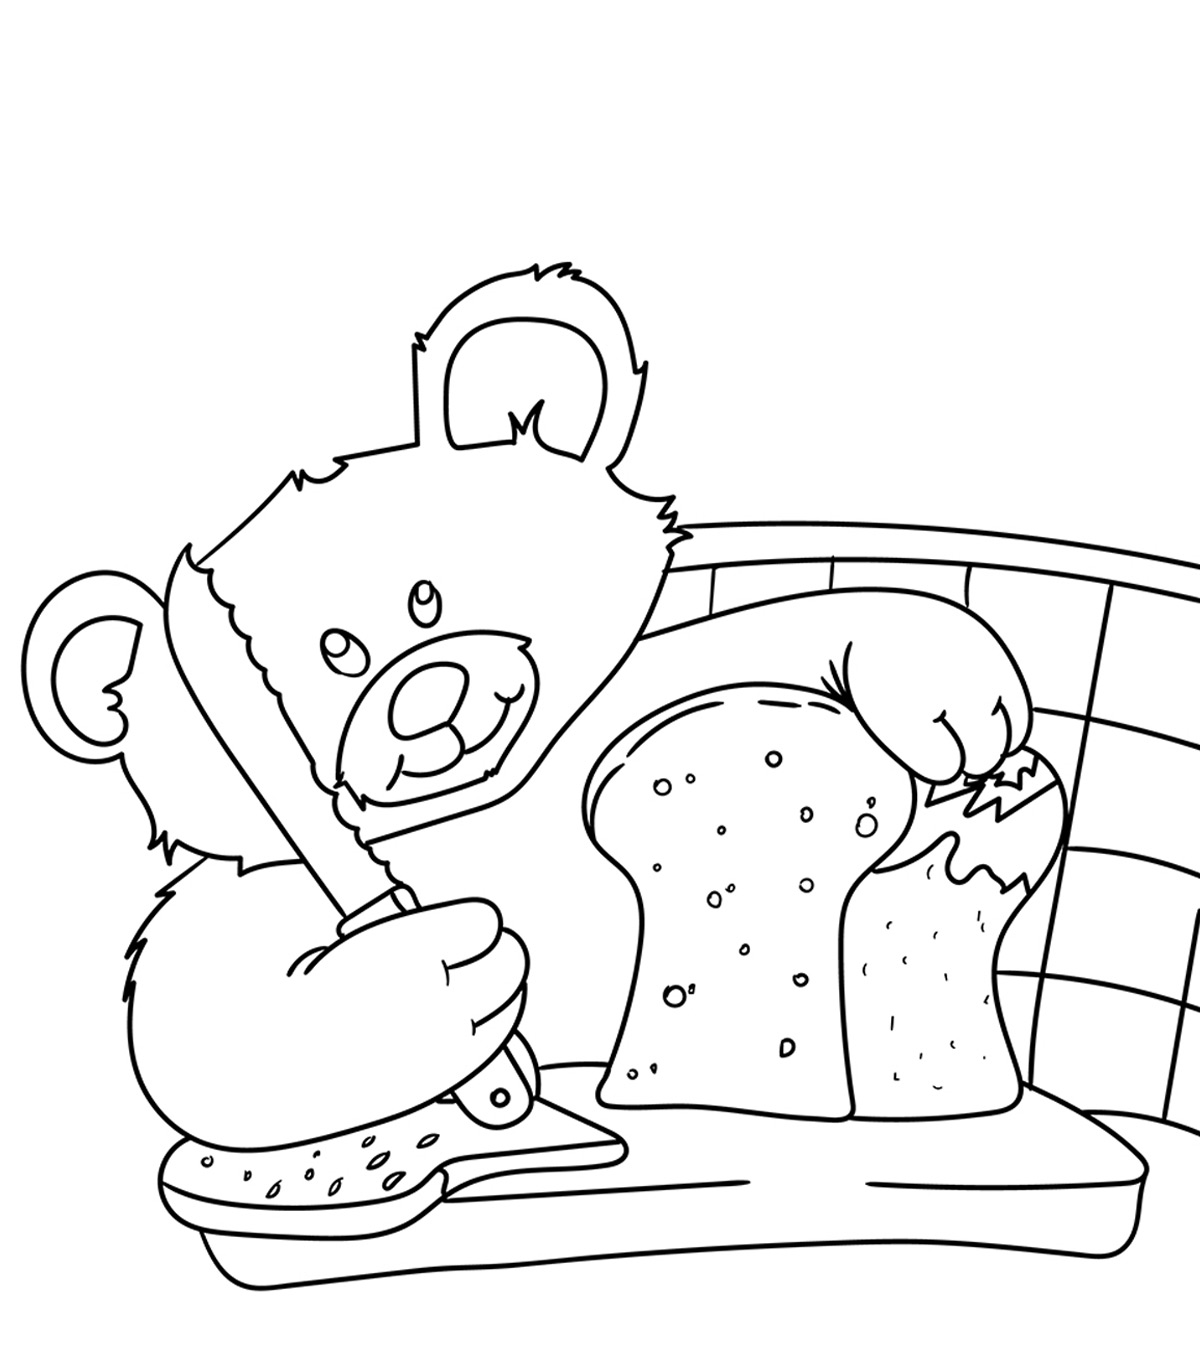 10 Yummy Bread Coloring Pages For Your Little One